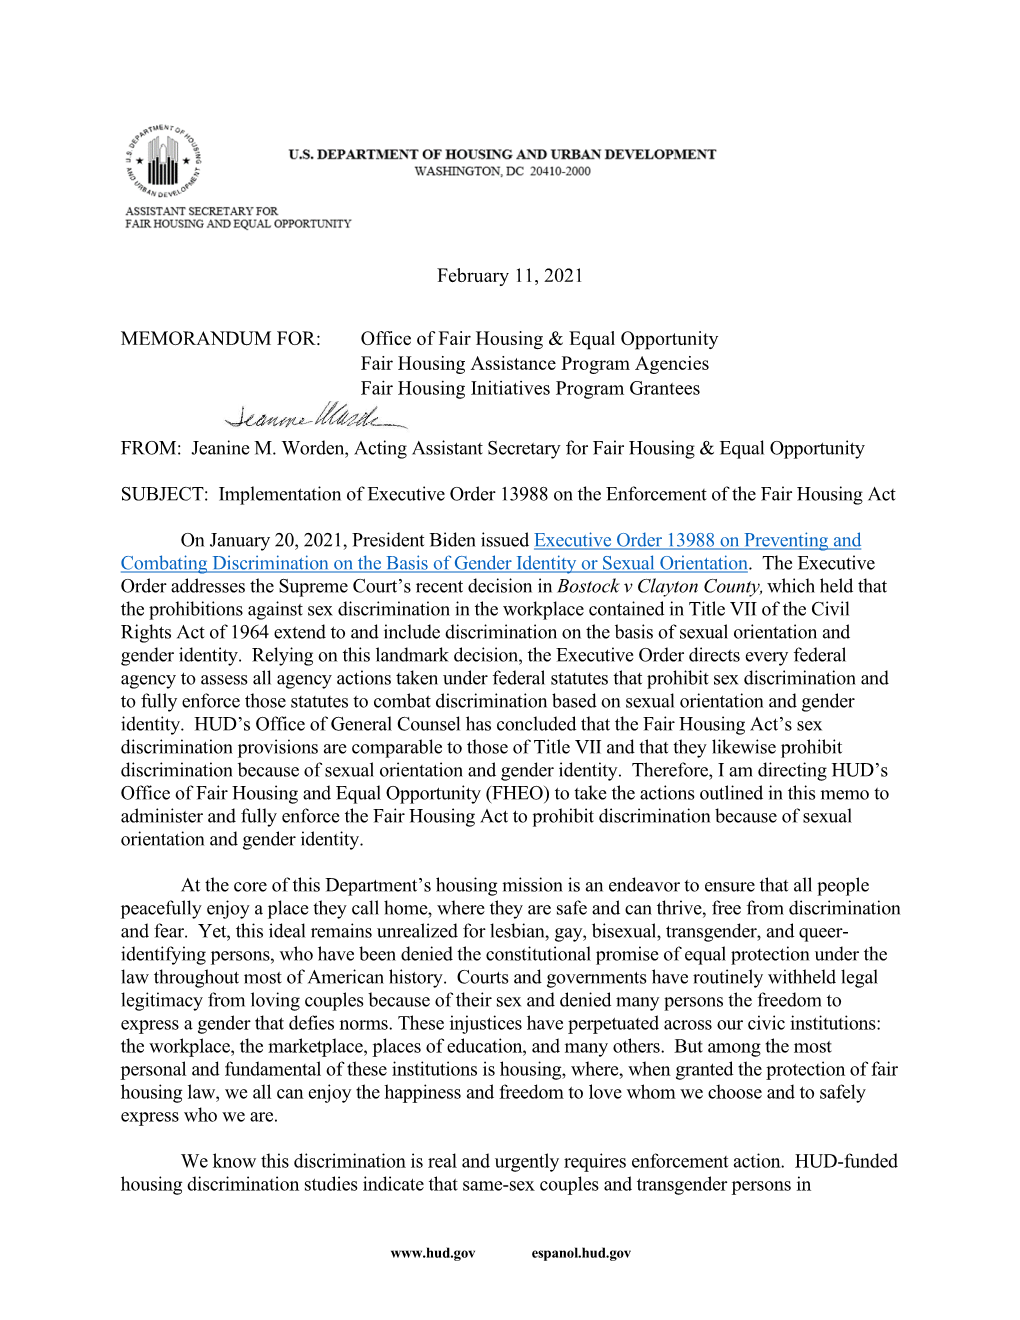 Implementation of Executive Order 13988 on the Enforcement of the Fair Housing Act